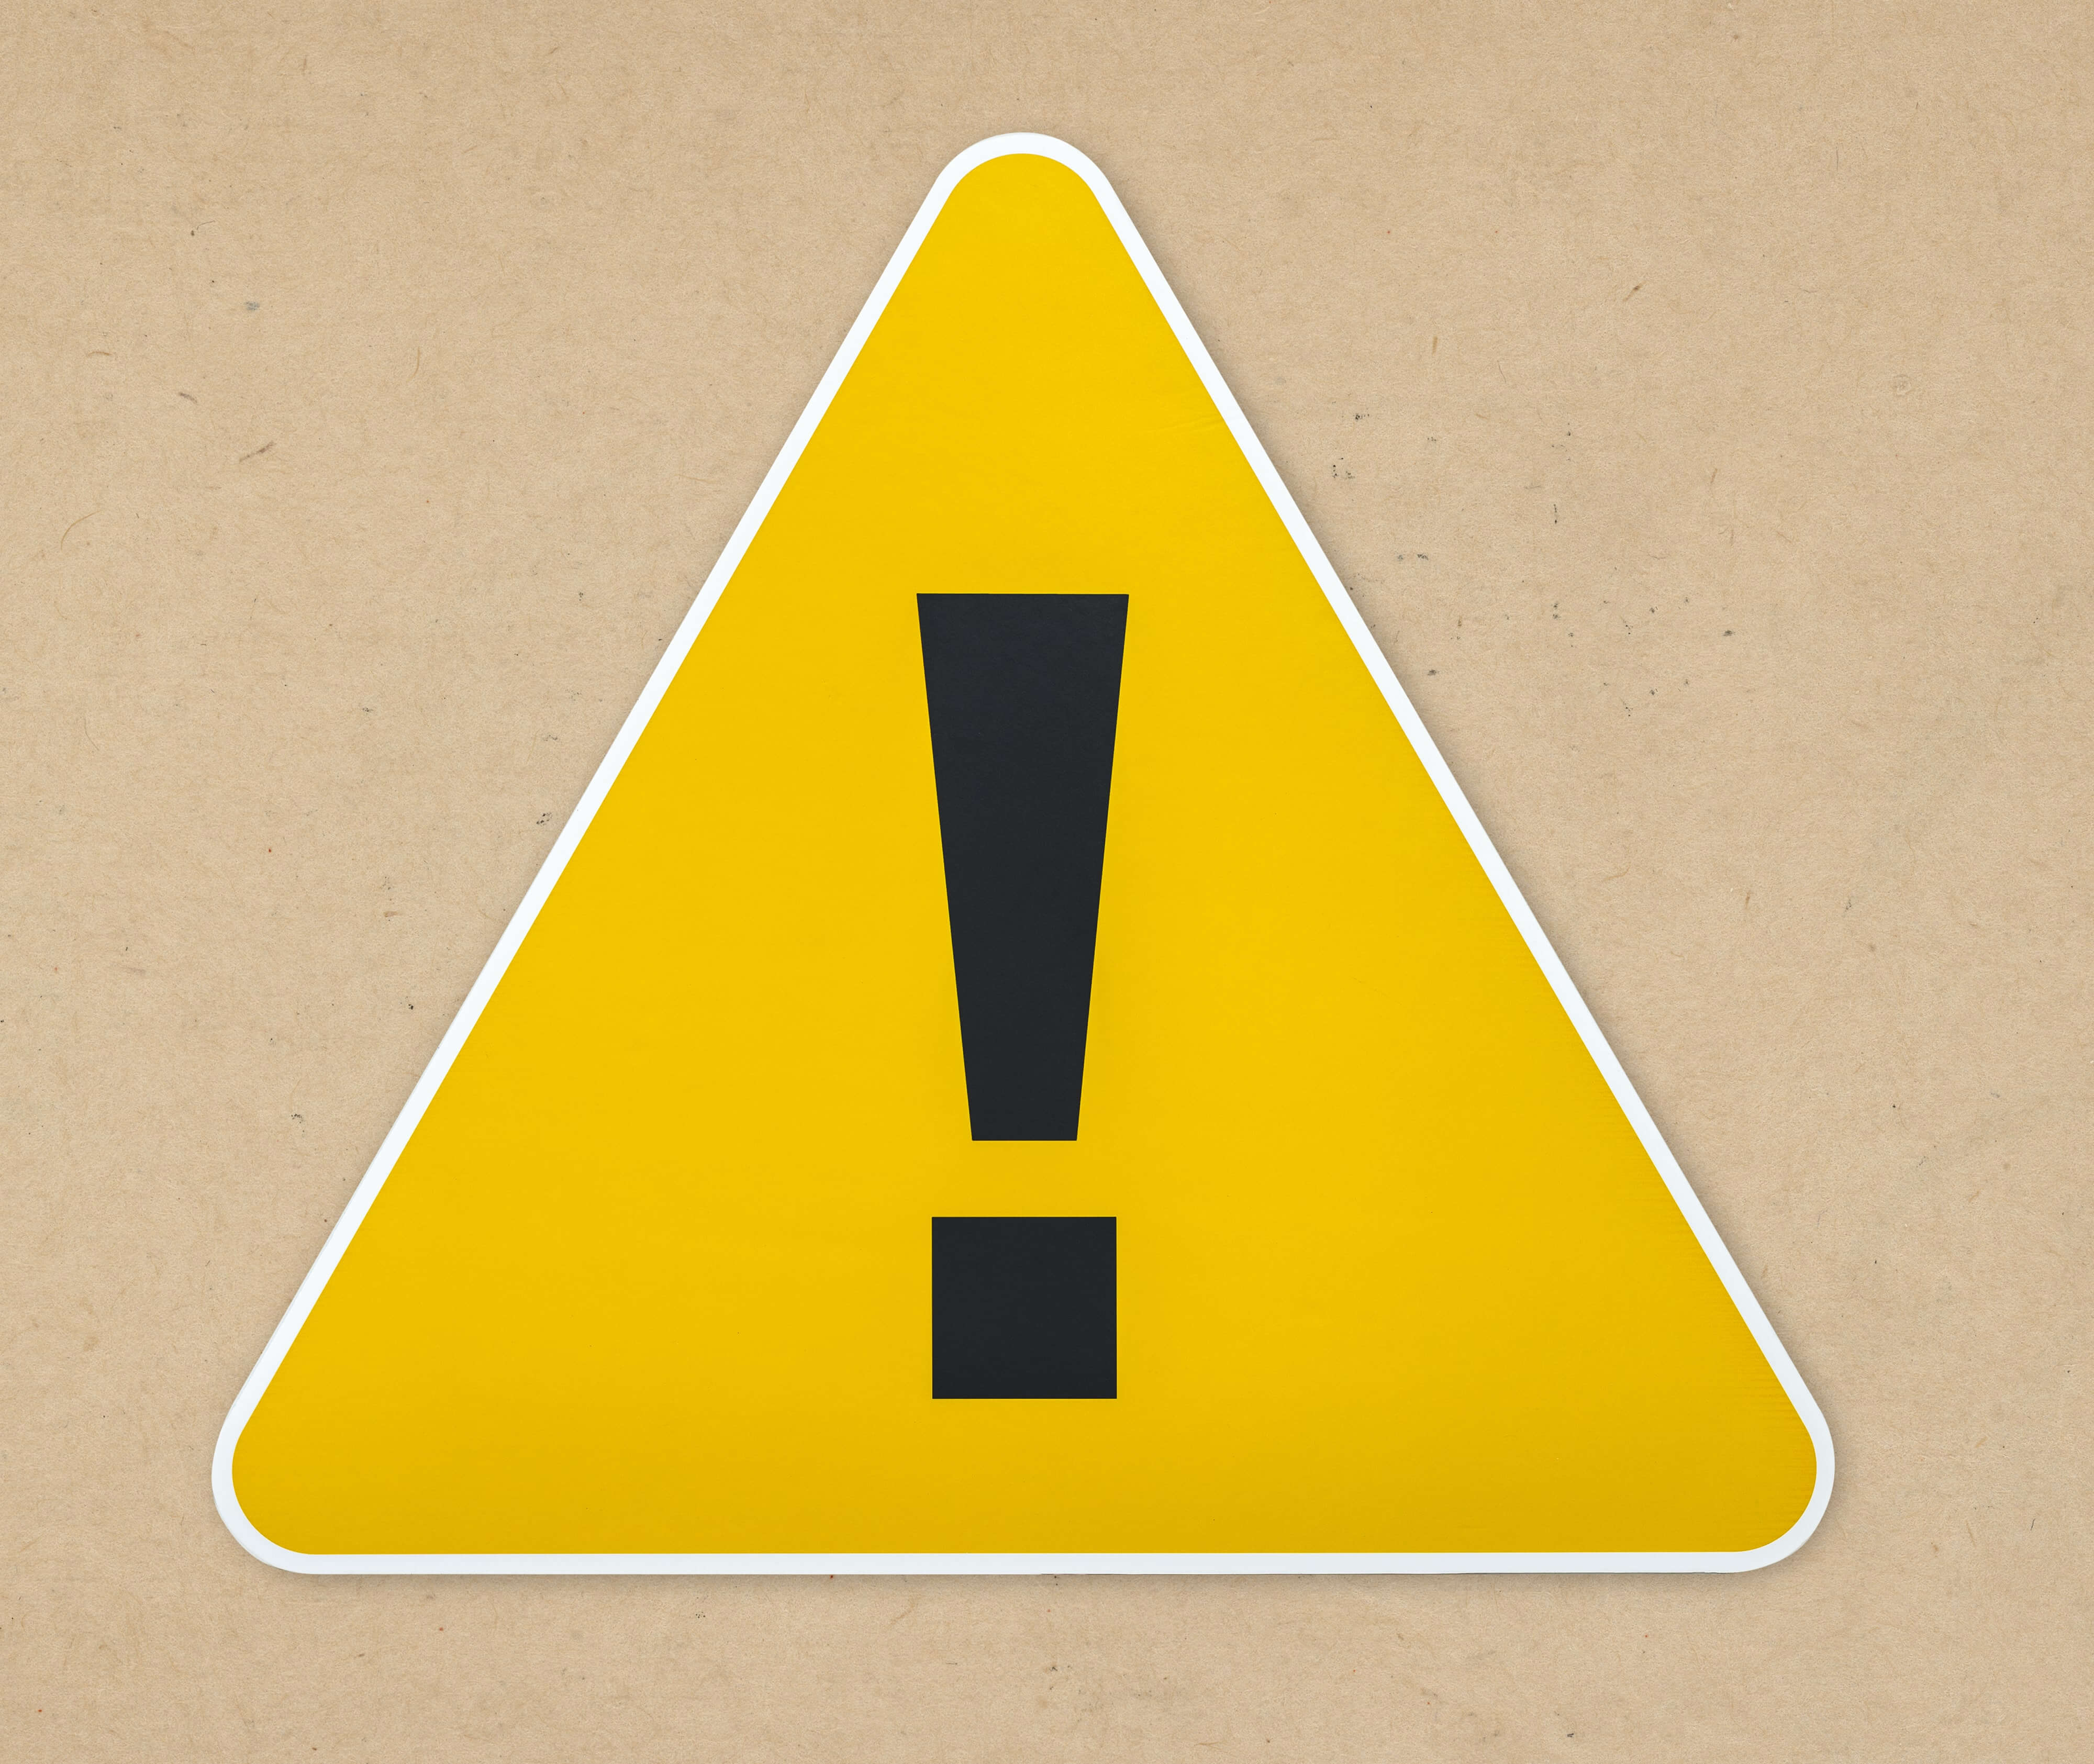 yellow-triangle-warning-sign-icon-isolated-min (1)